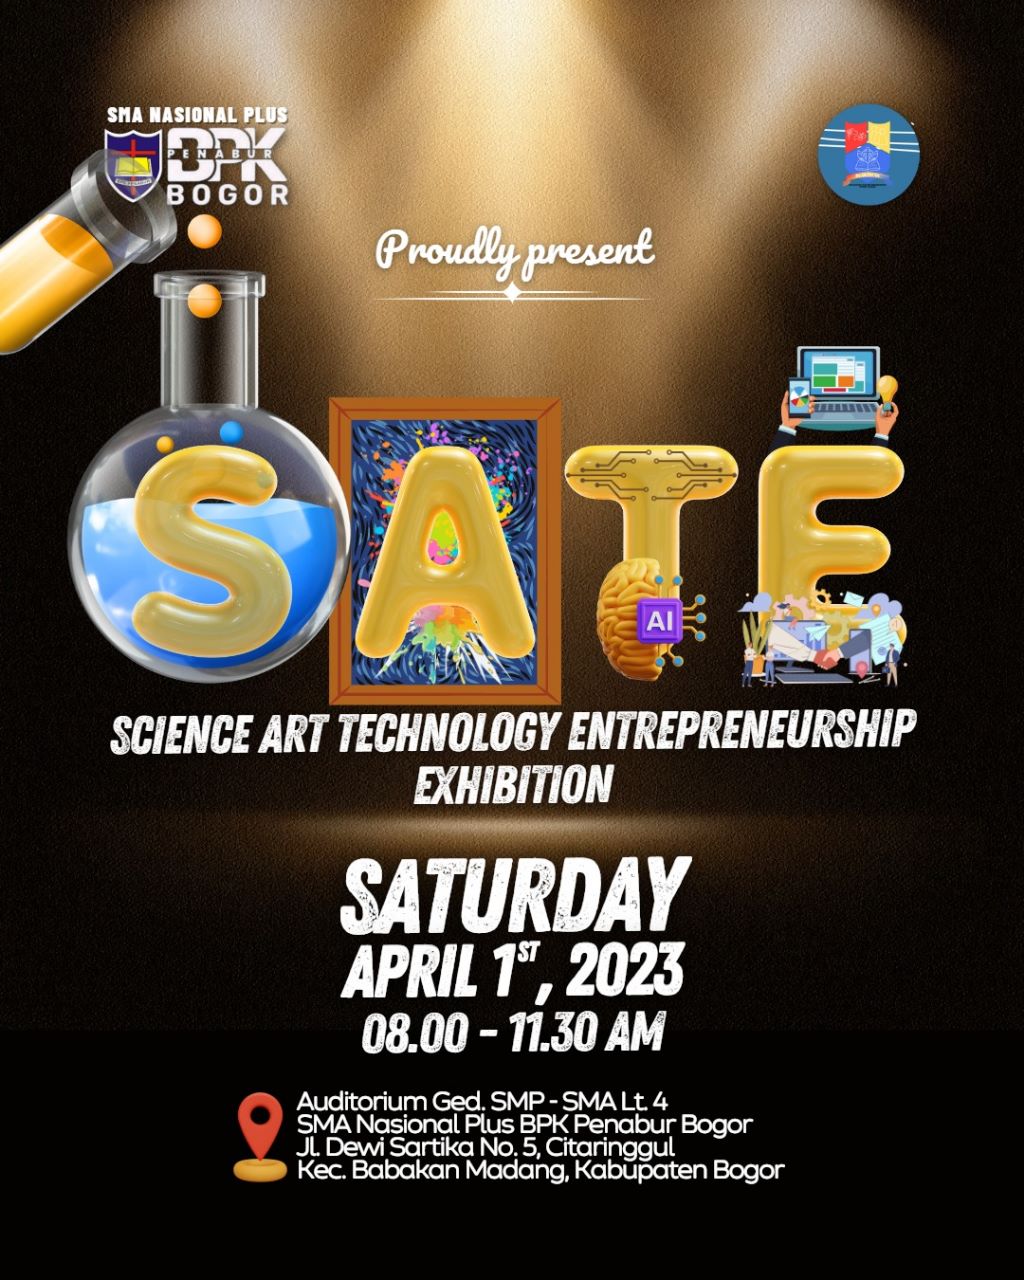 Science Art Technology and Entrepreneur (SATE) Exhibition!